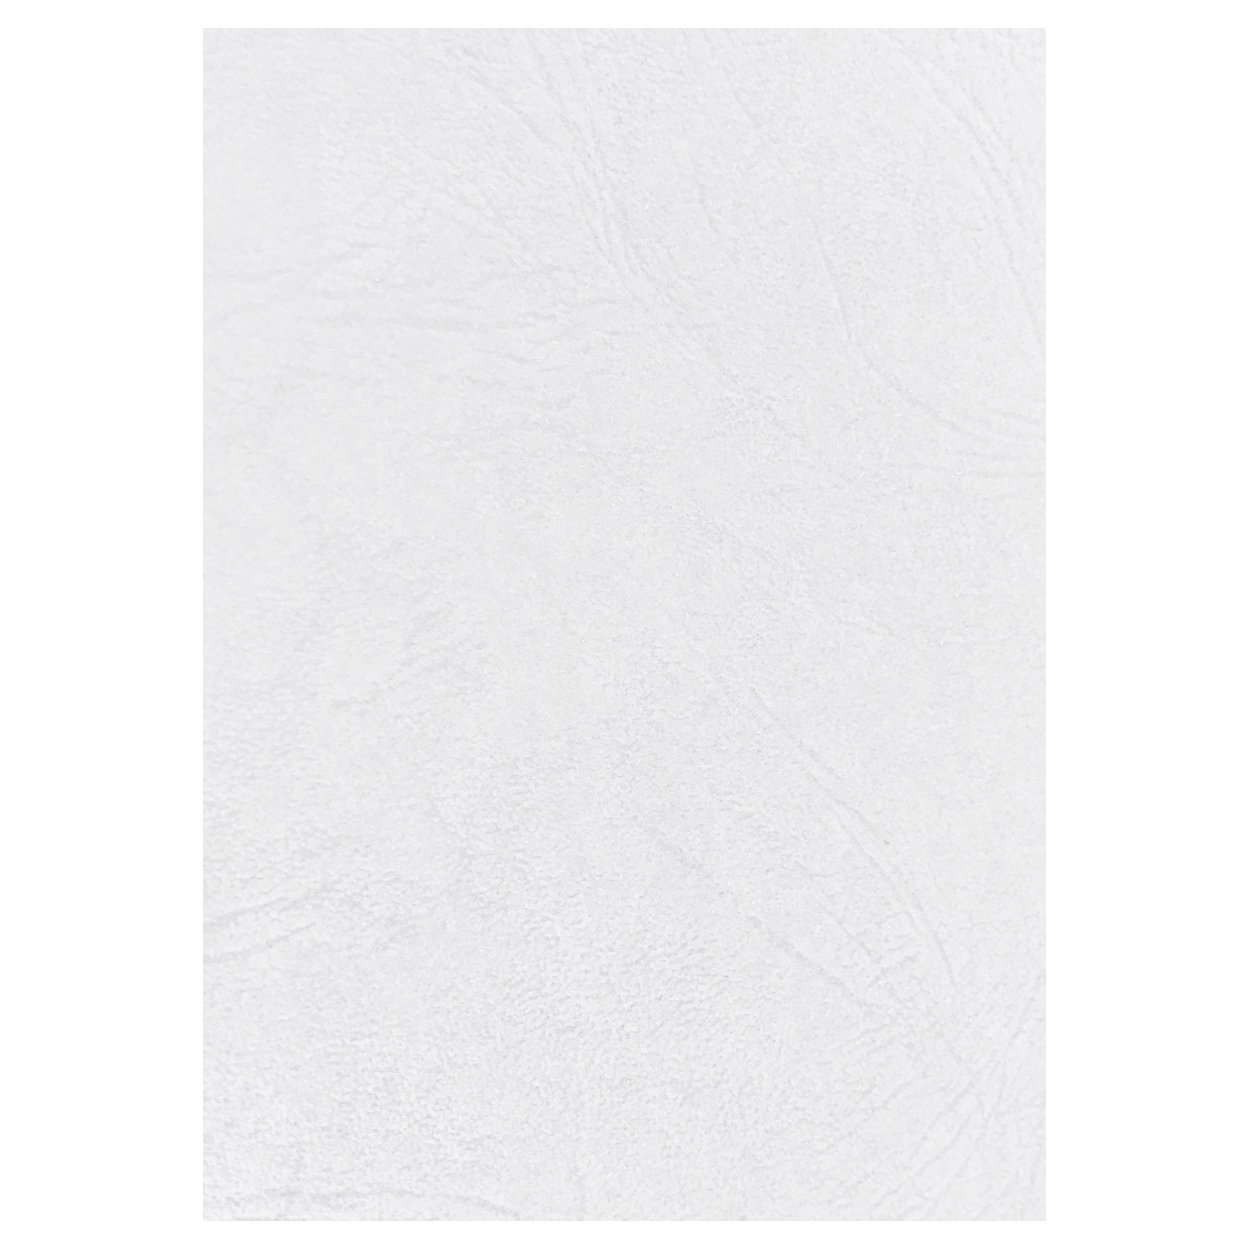 A4 Leathergrain Covers 250gsm - White (Pkt 100) - Click Image to Close